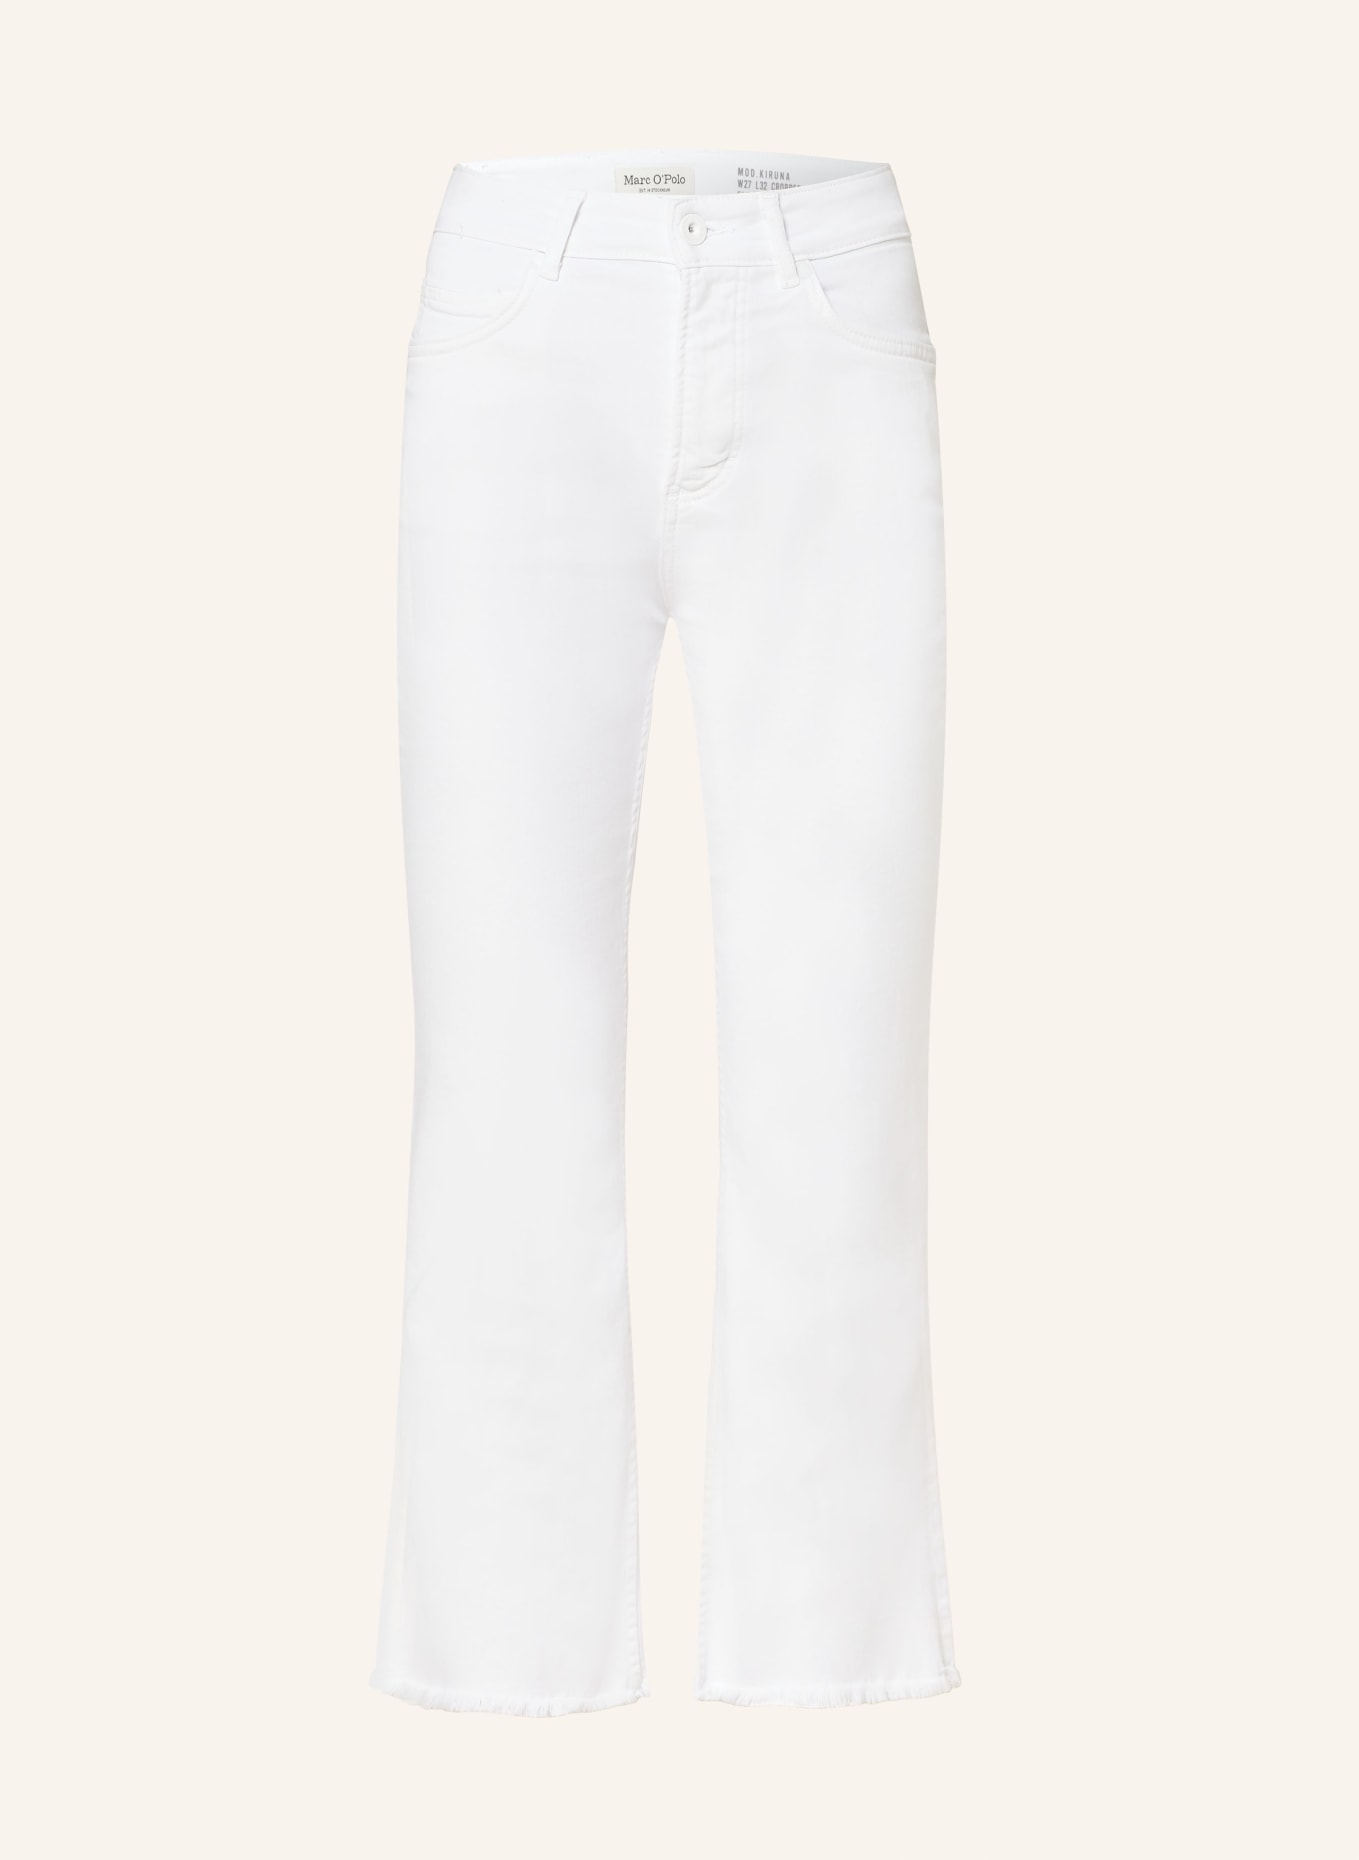 Marc O'Polo 7/8-Jeans, Farbe: WEISS (Bild 1)